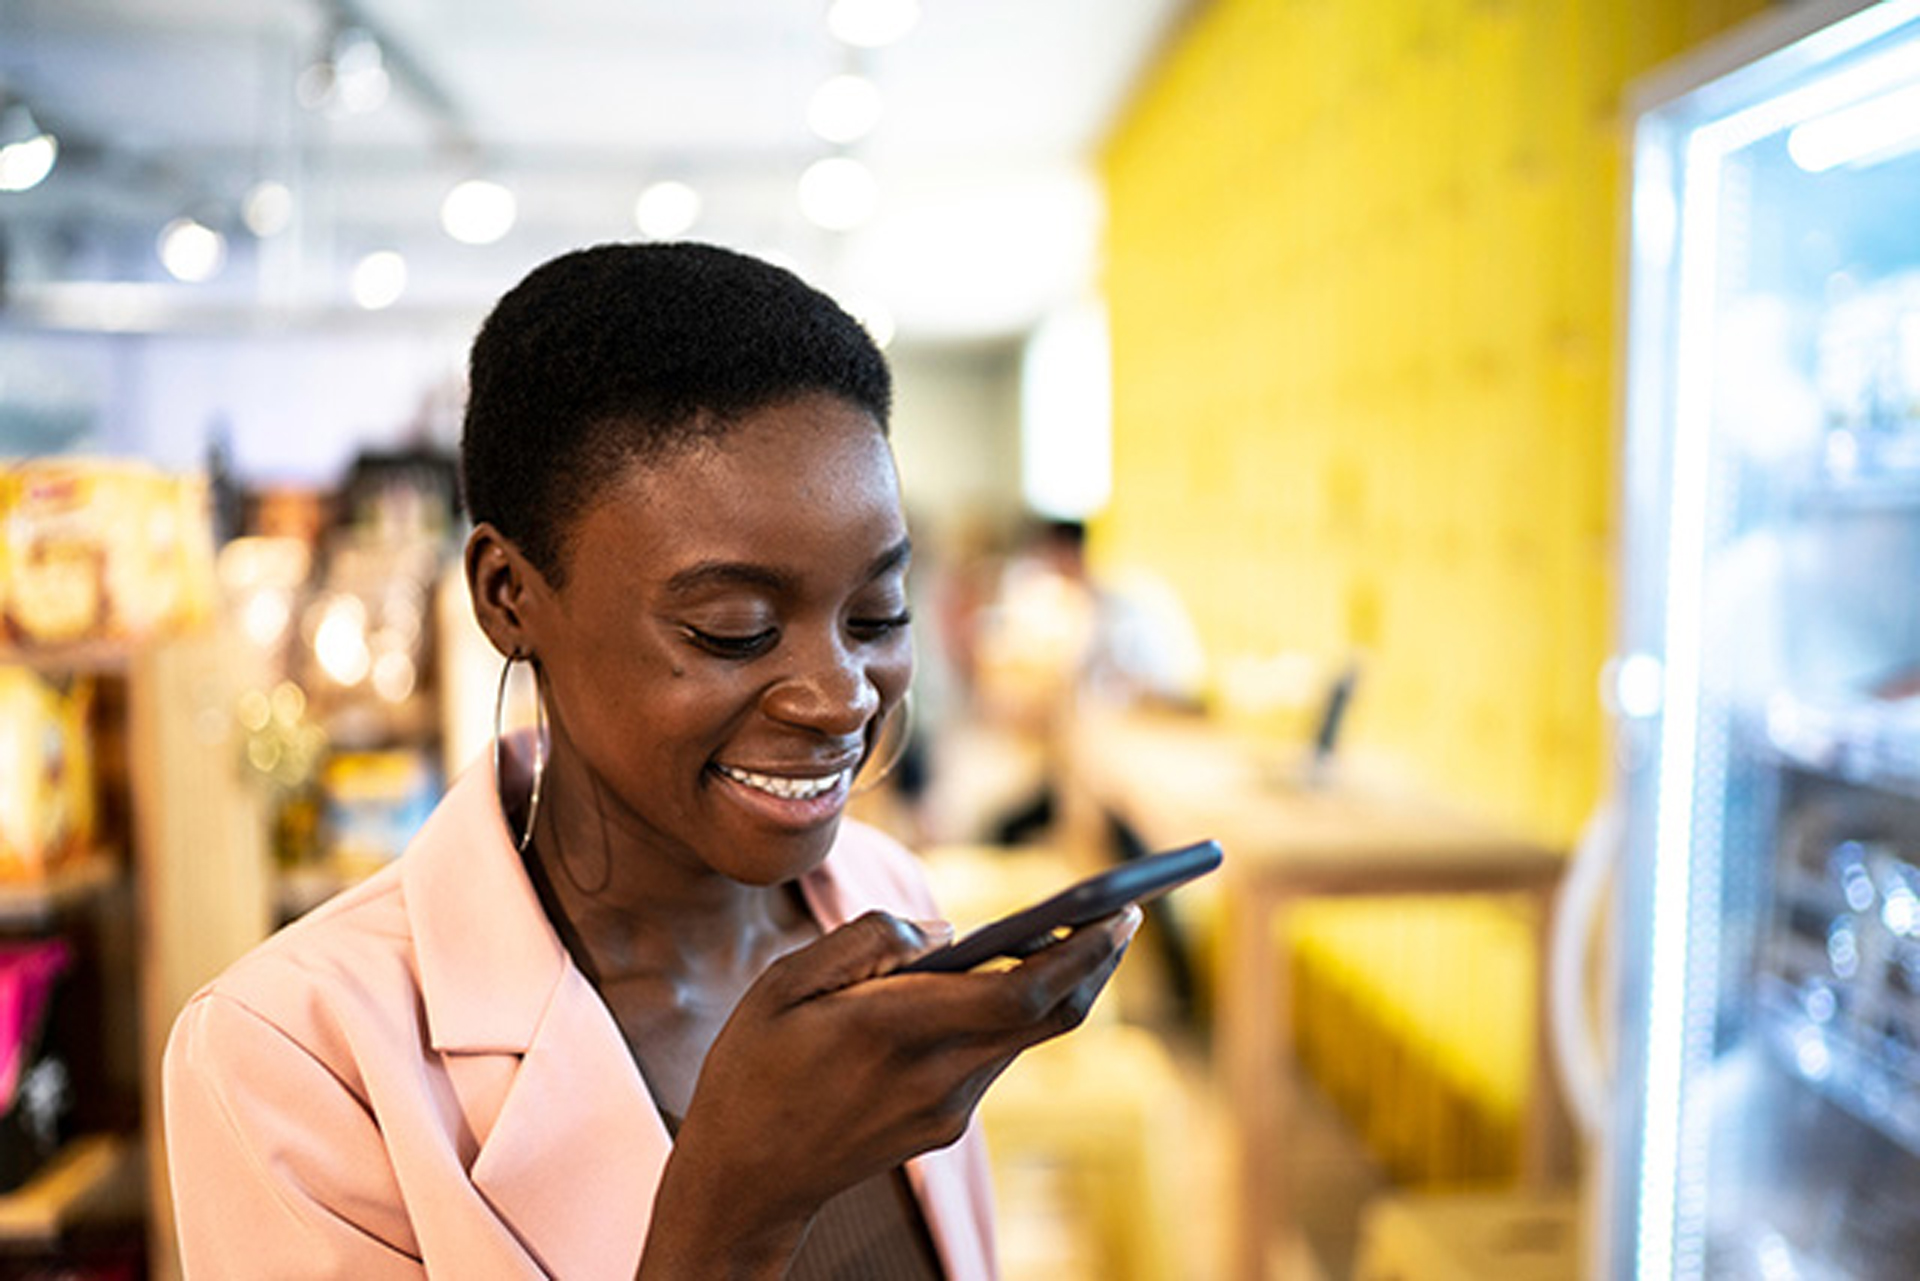 A cheerful woman in a light pink blazer speaking into her phone in a brightly lit store.